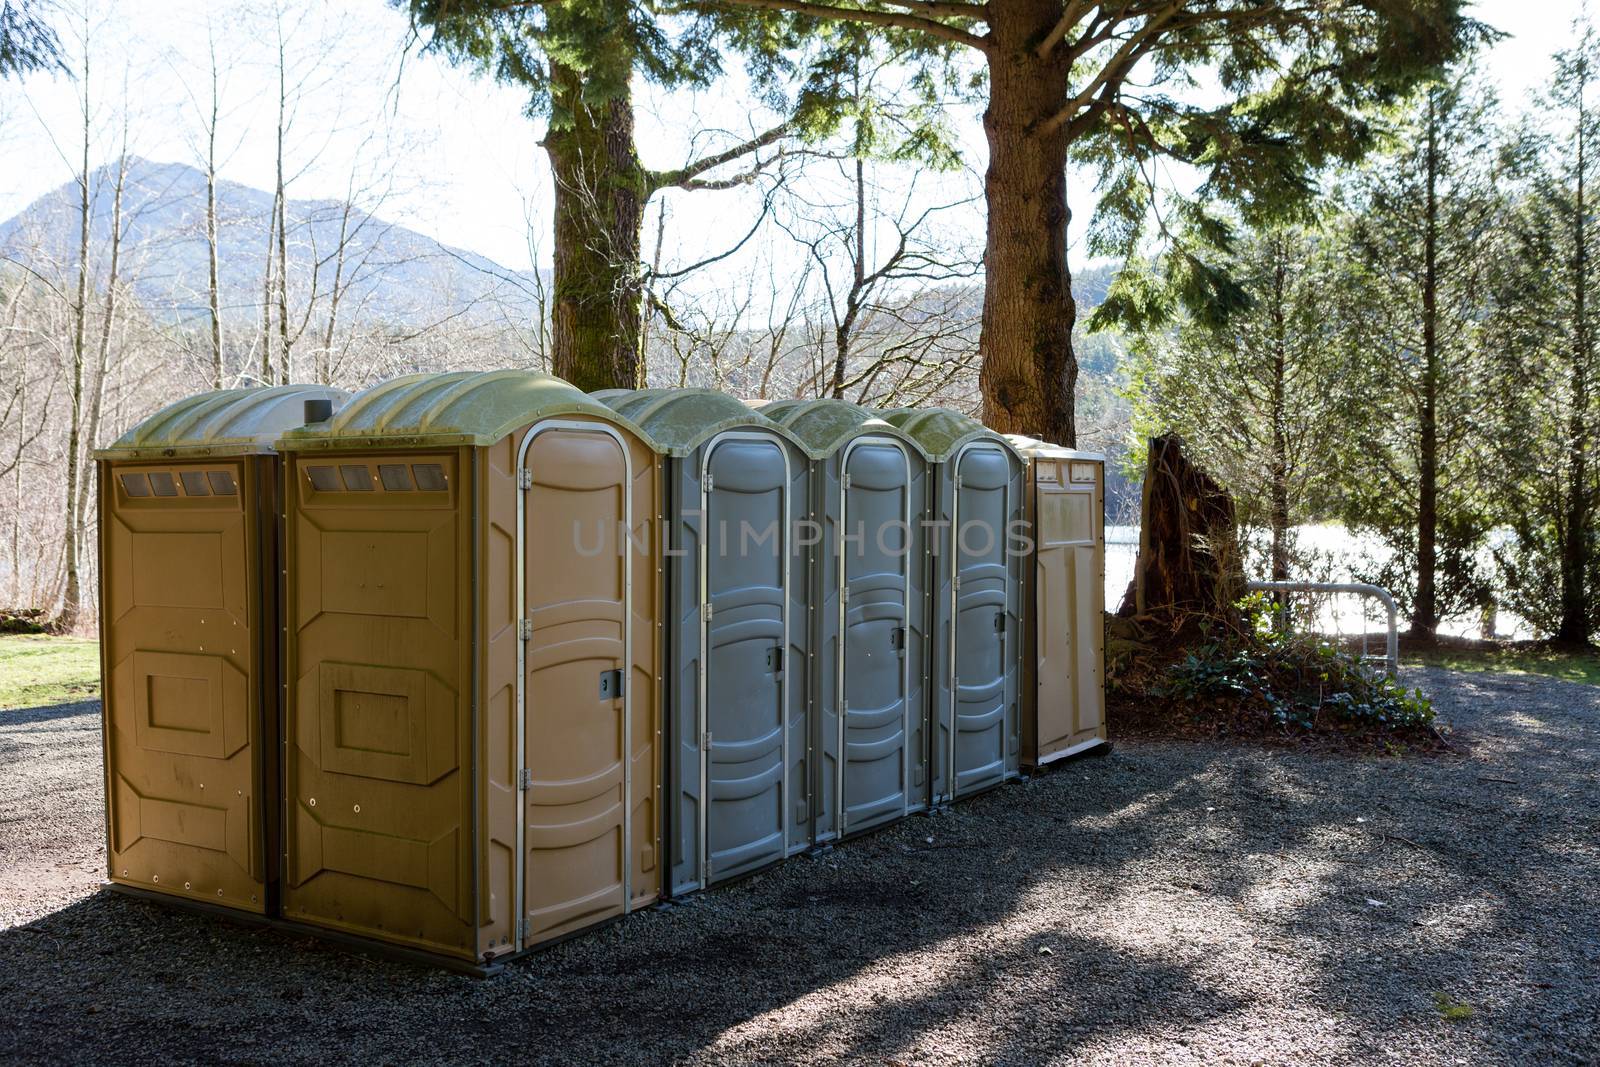 Row of public Portapotty toilets in a park for public ablutions using chemical toilets and deodorizers for smell, standing in the shade of a tree with closed doors